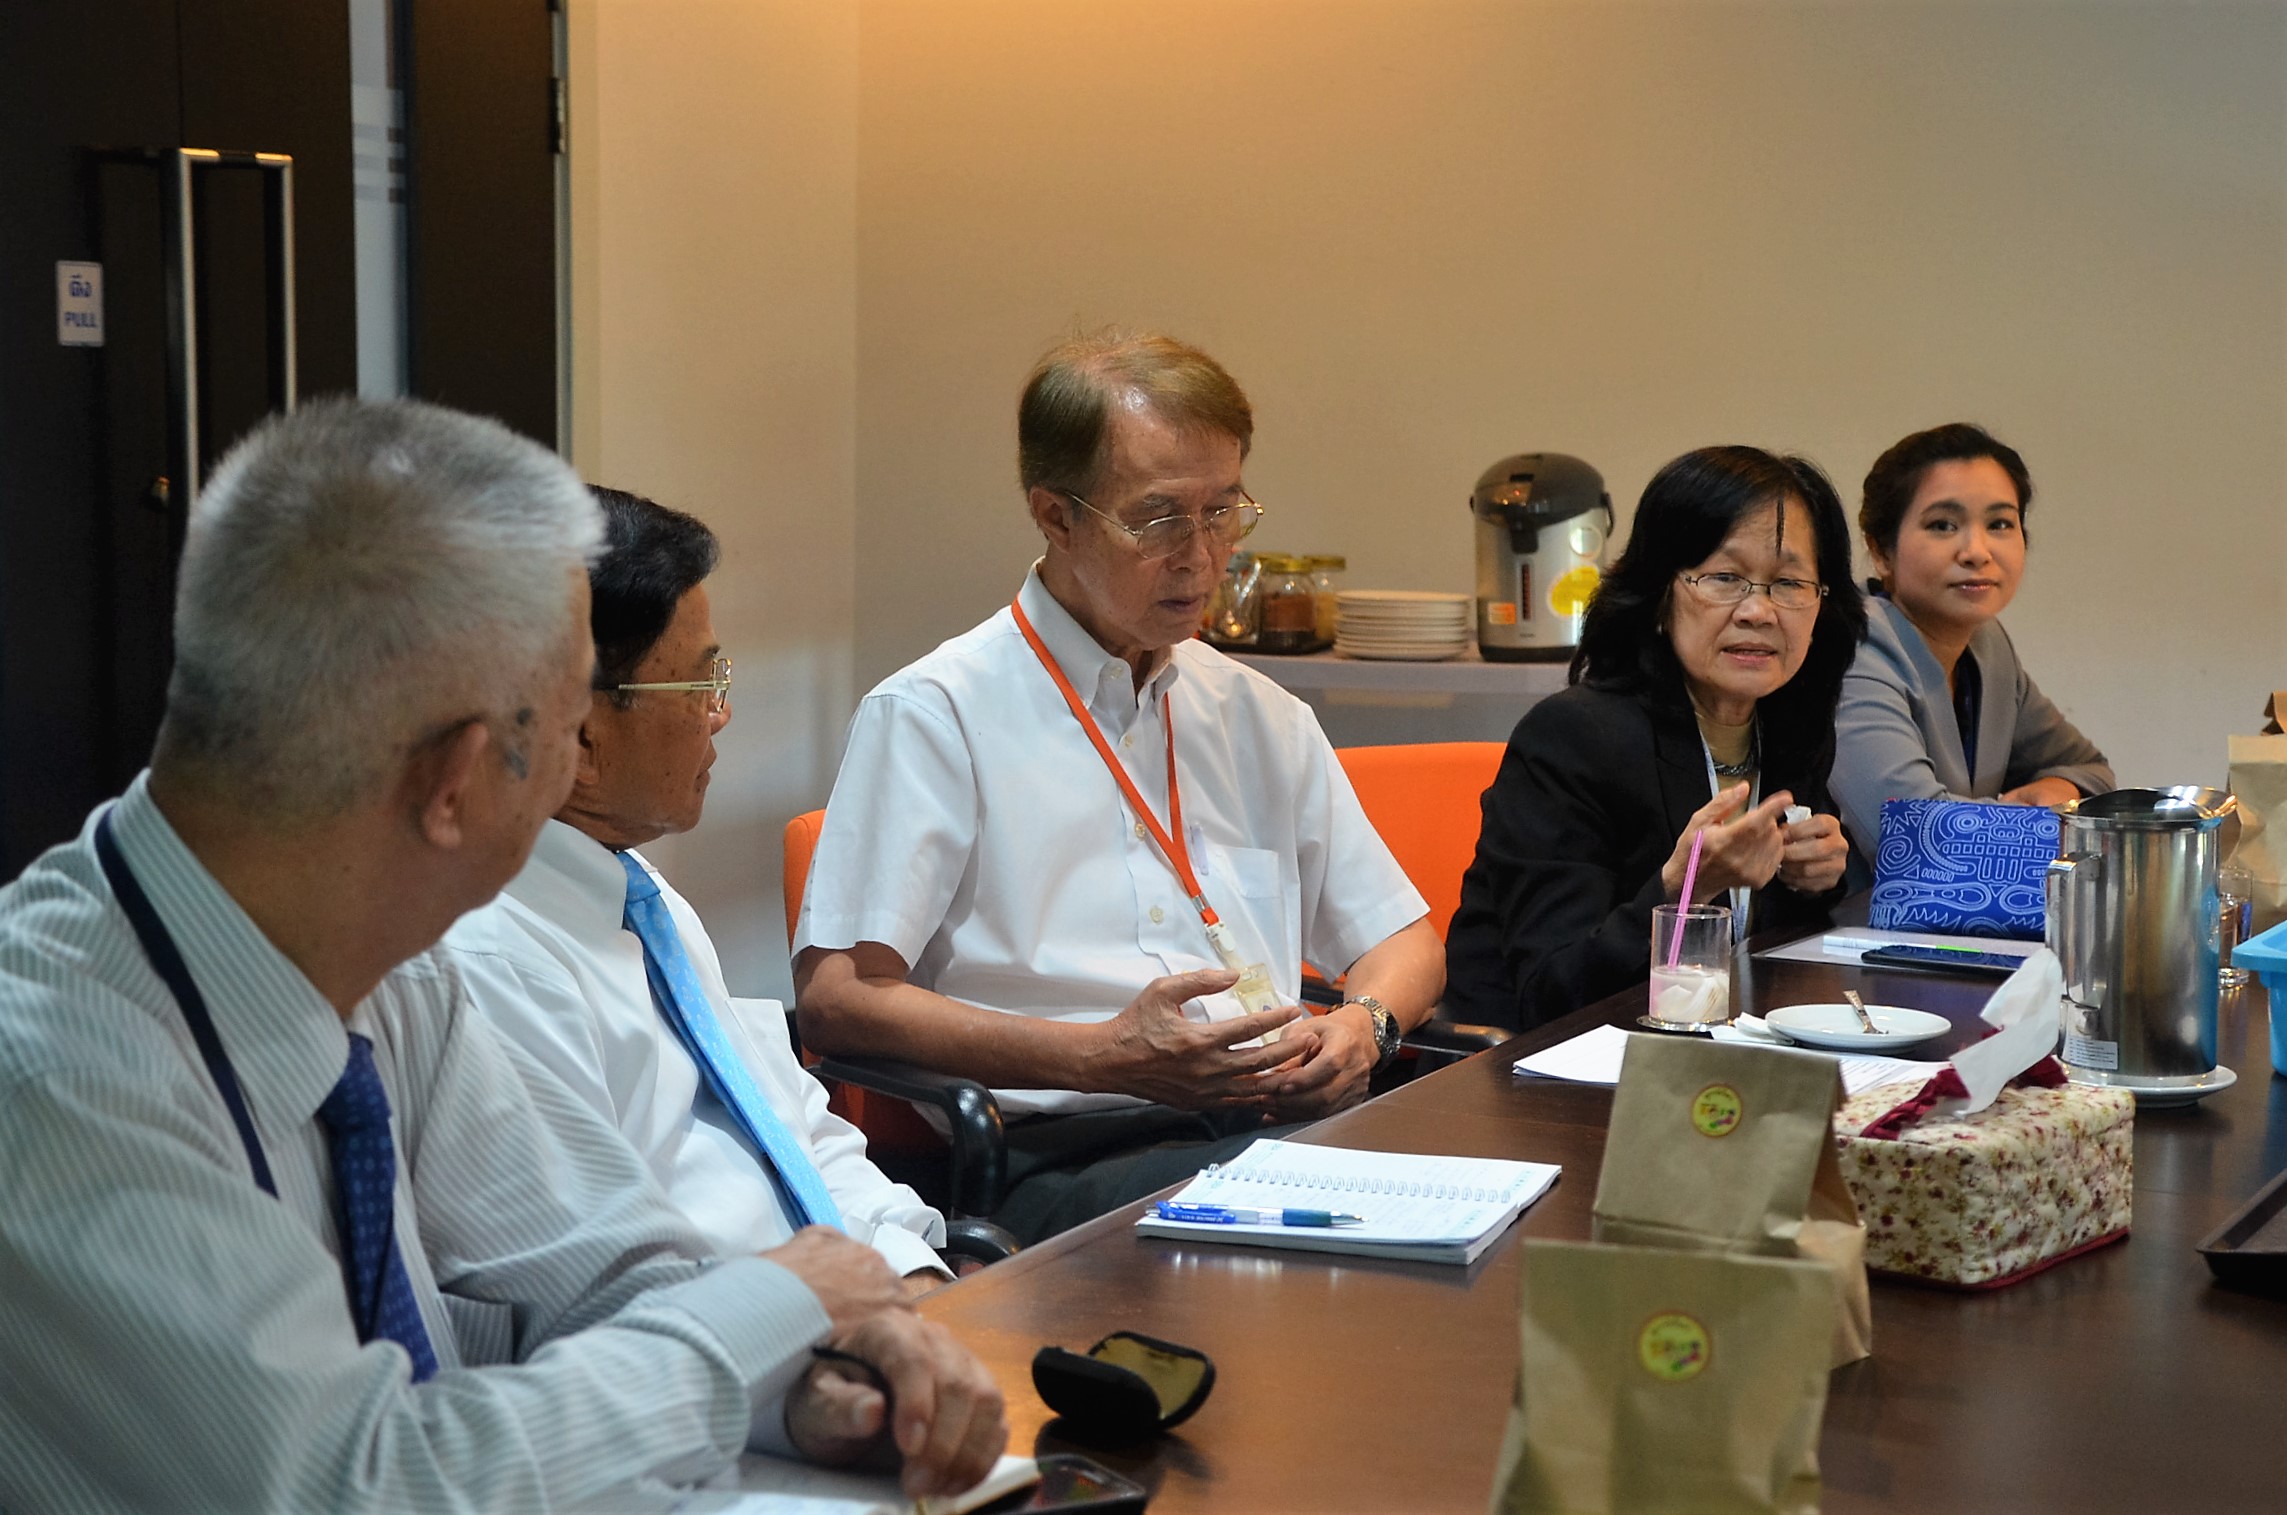 IPSR-Institutional Review Board (IPSR-IRB) has scheduled last Thursday of every month, being research projects Reviewing day for accreditation on research ethics.